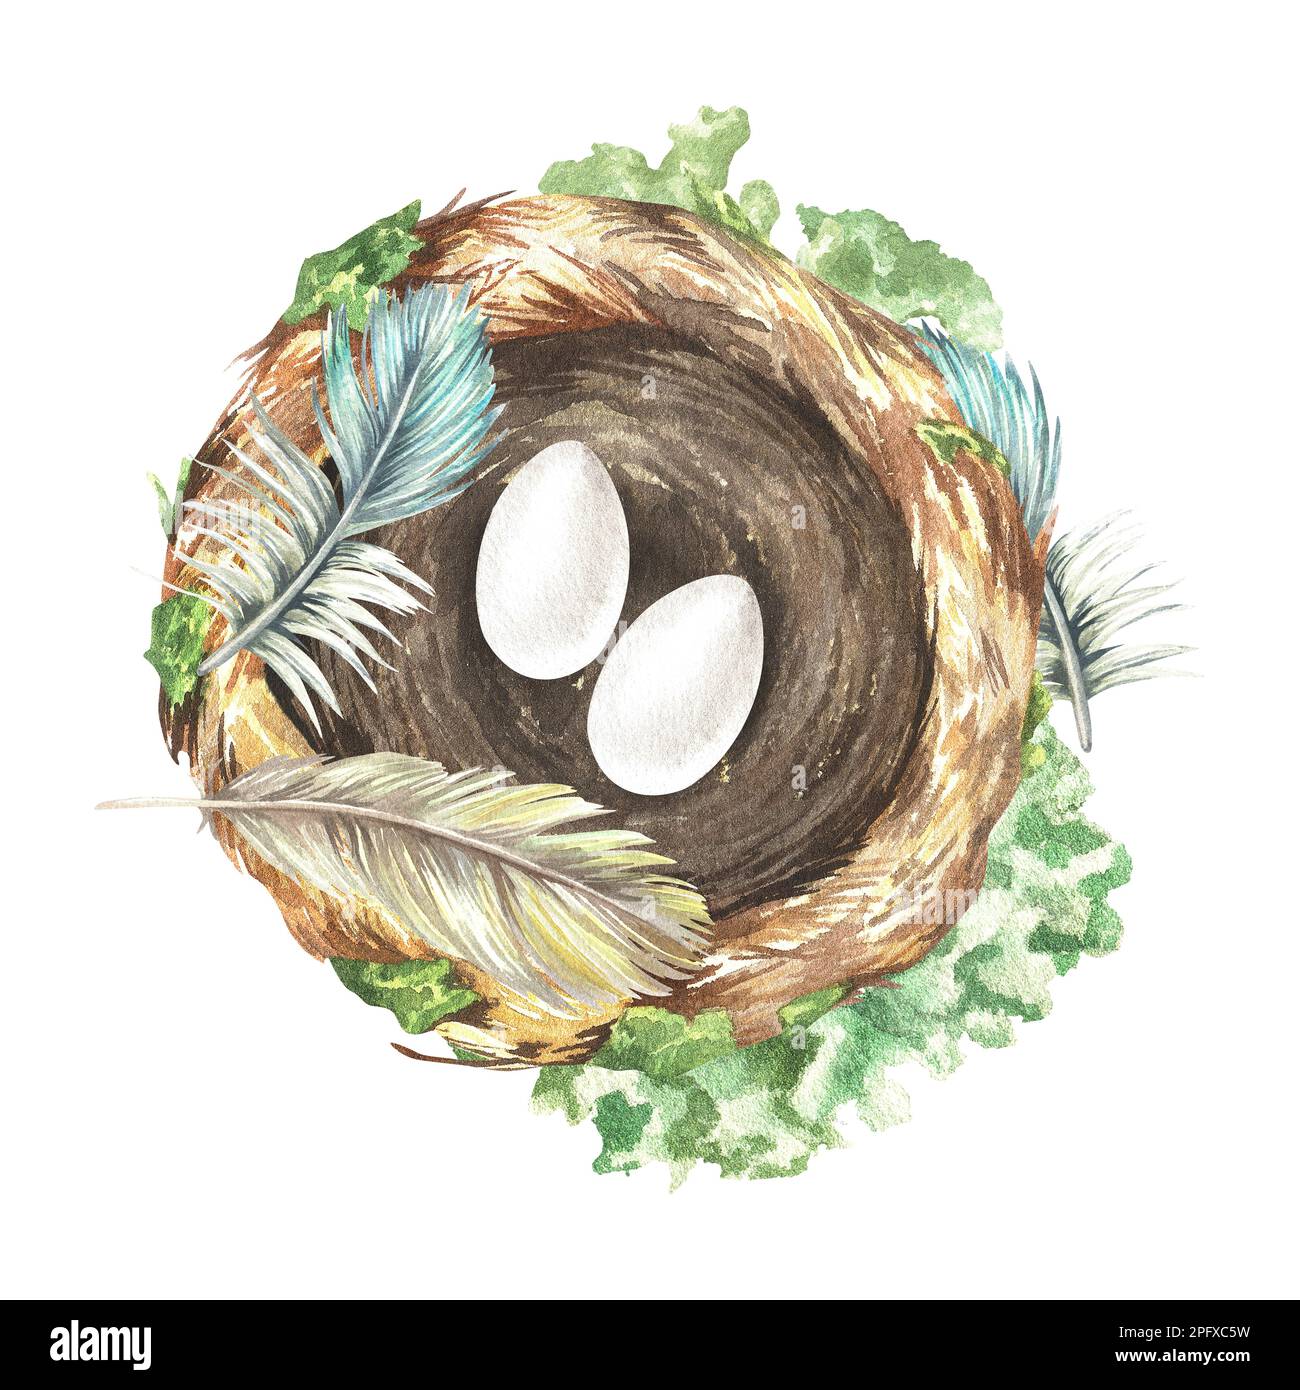 Nest with two eggs and feathers top view. Watercolor illustration. Round thatched hummingbird house. Isolated on a white background. For rustic print Stock Photo